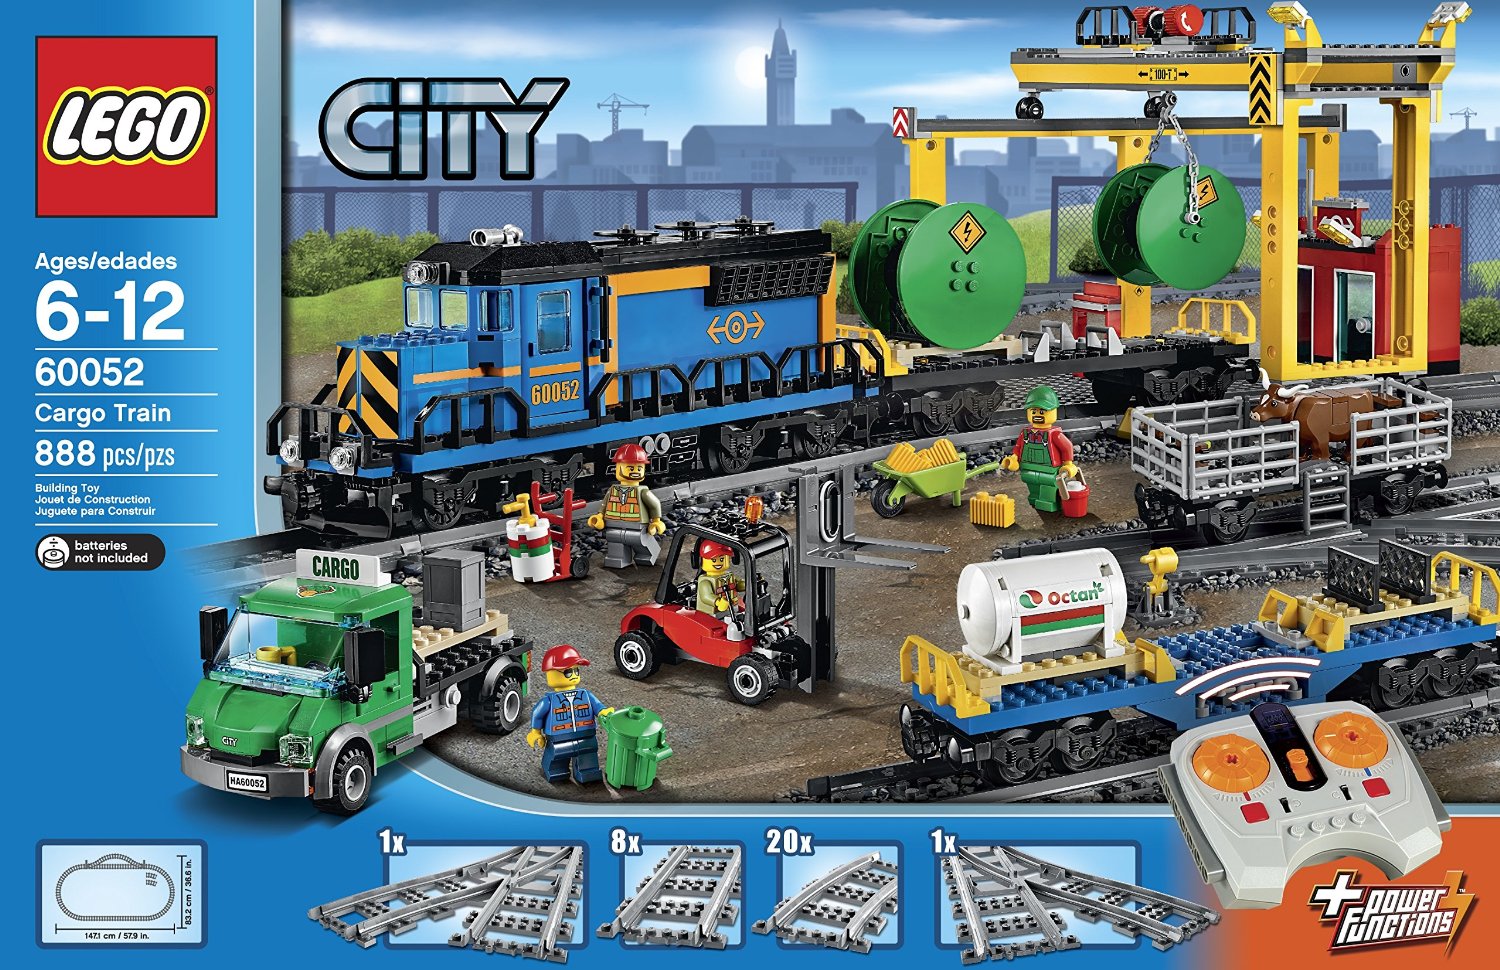 junk Prevail nationalism Get Up To 38% Off This 888-Piece LEGO Train Set - Simplemost